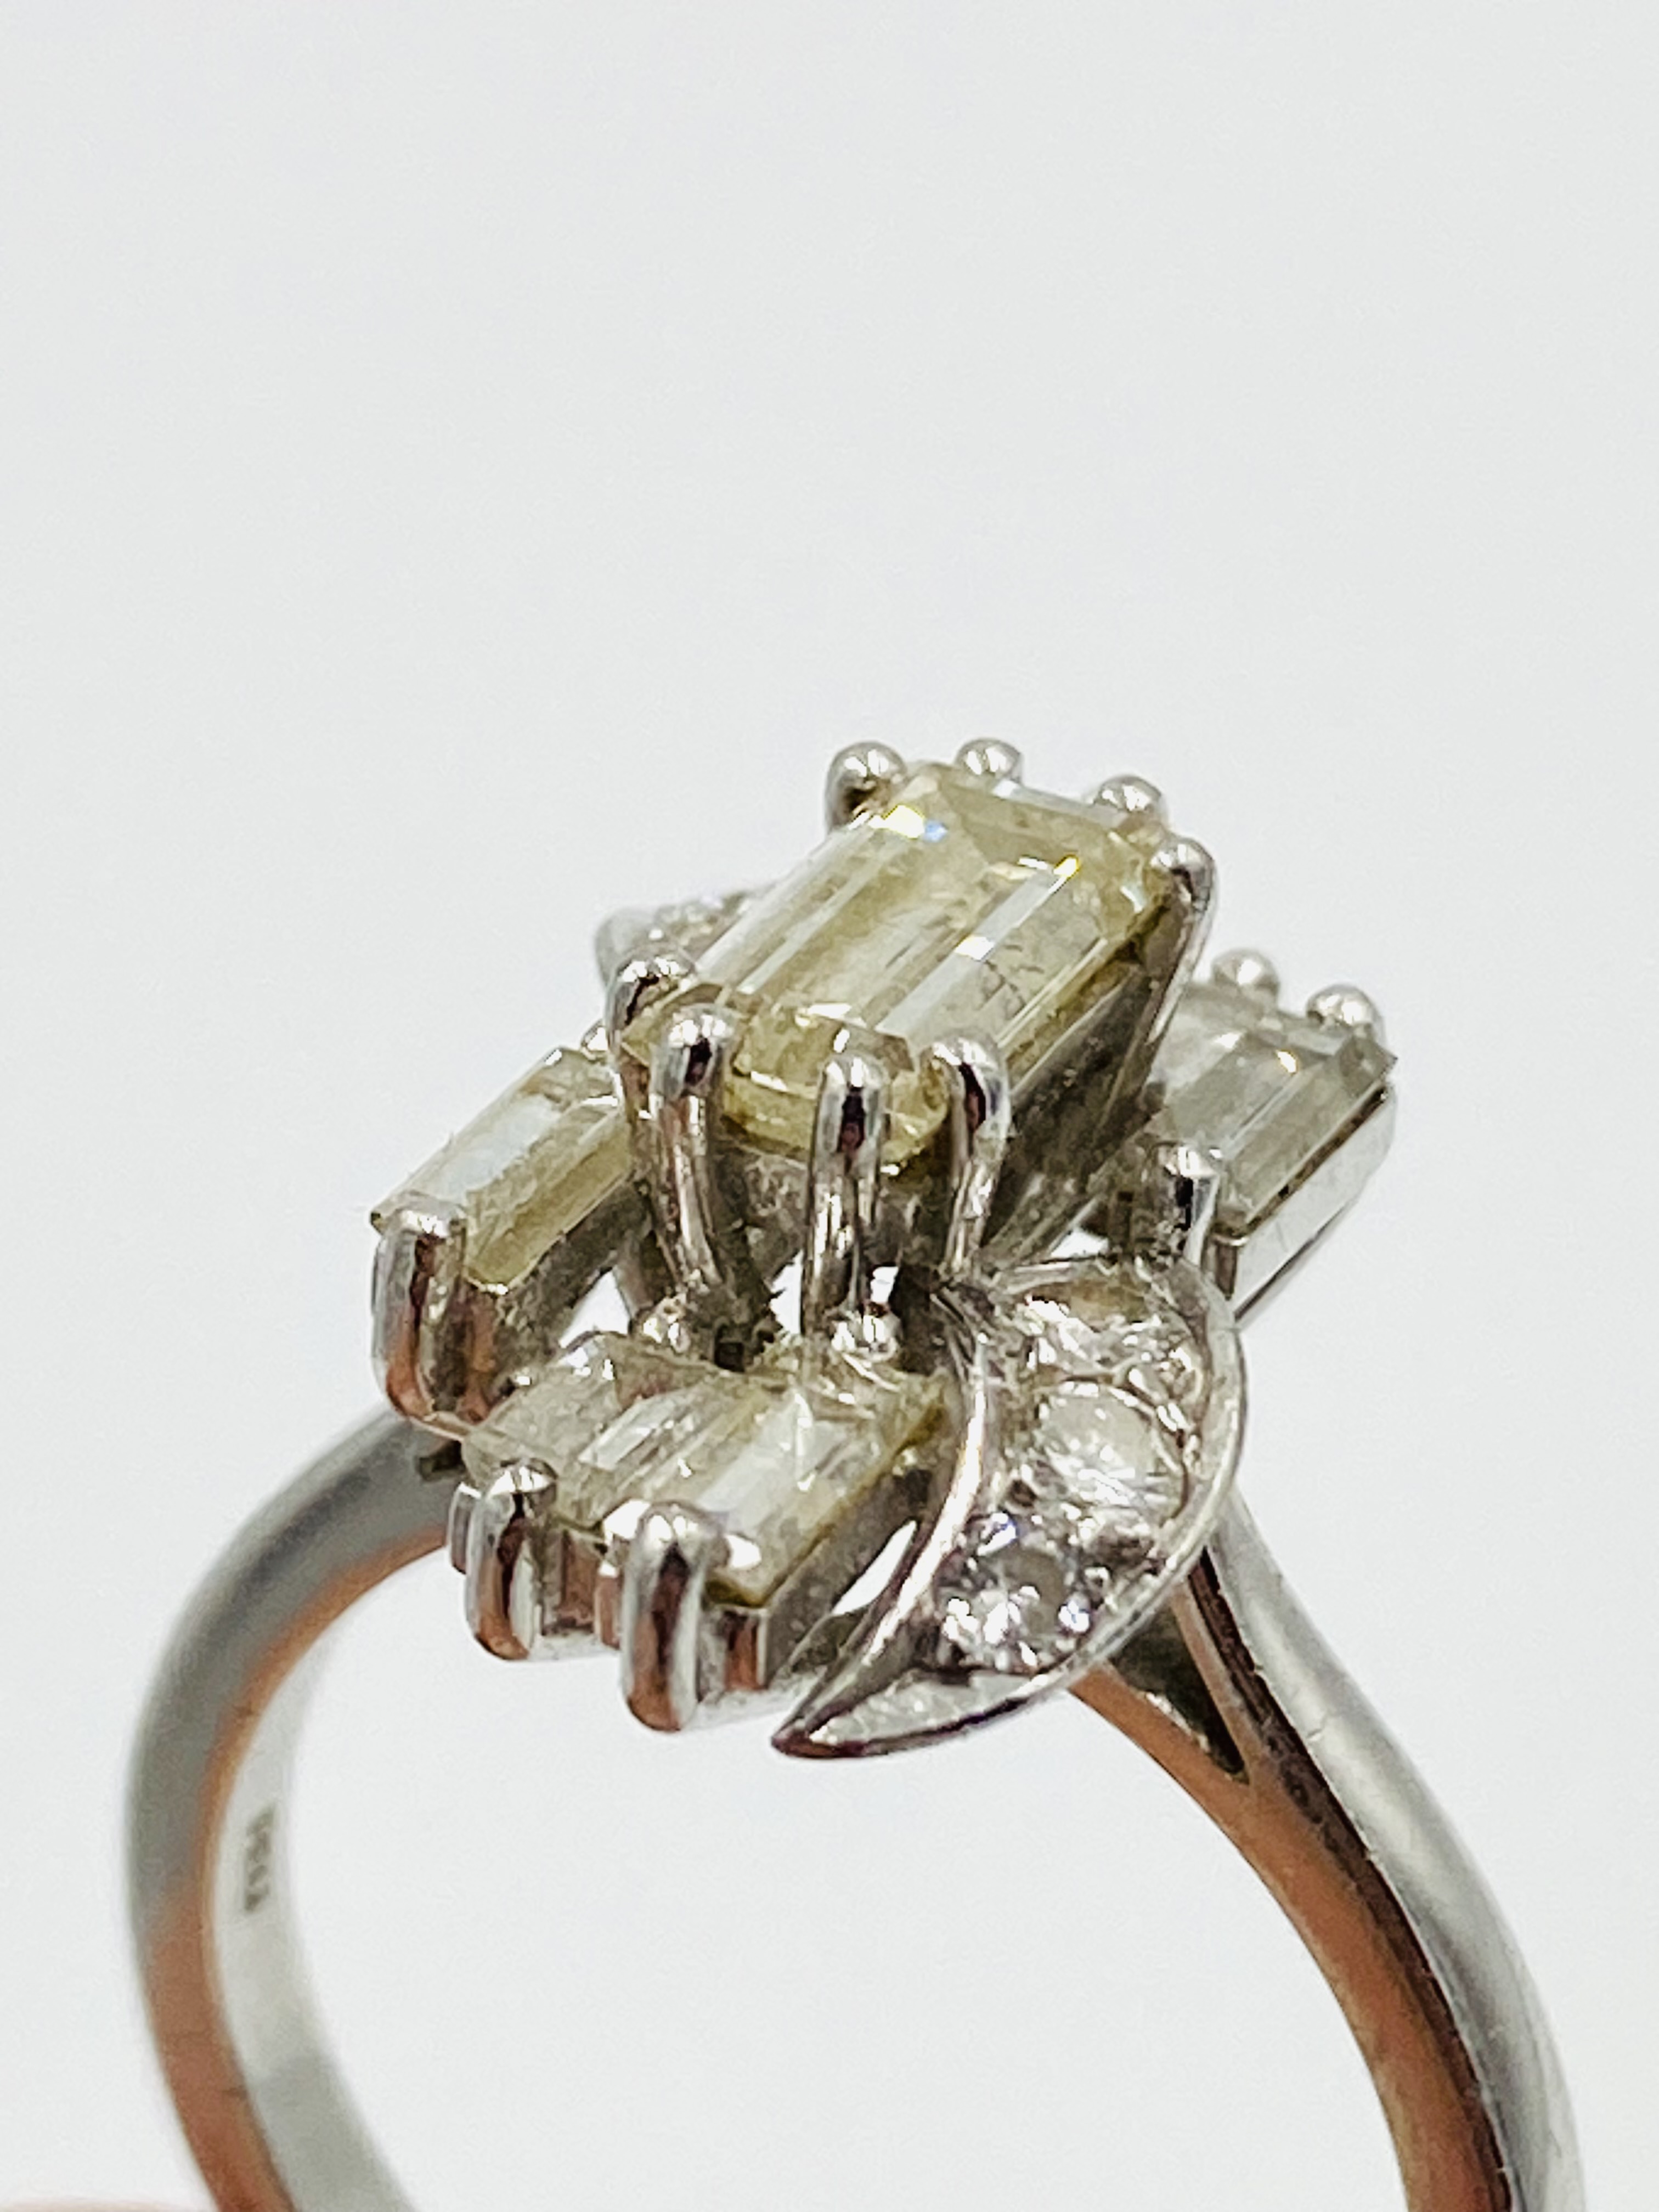 White gold and diamond cocktail ring - Image 4 of 5